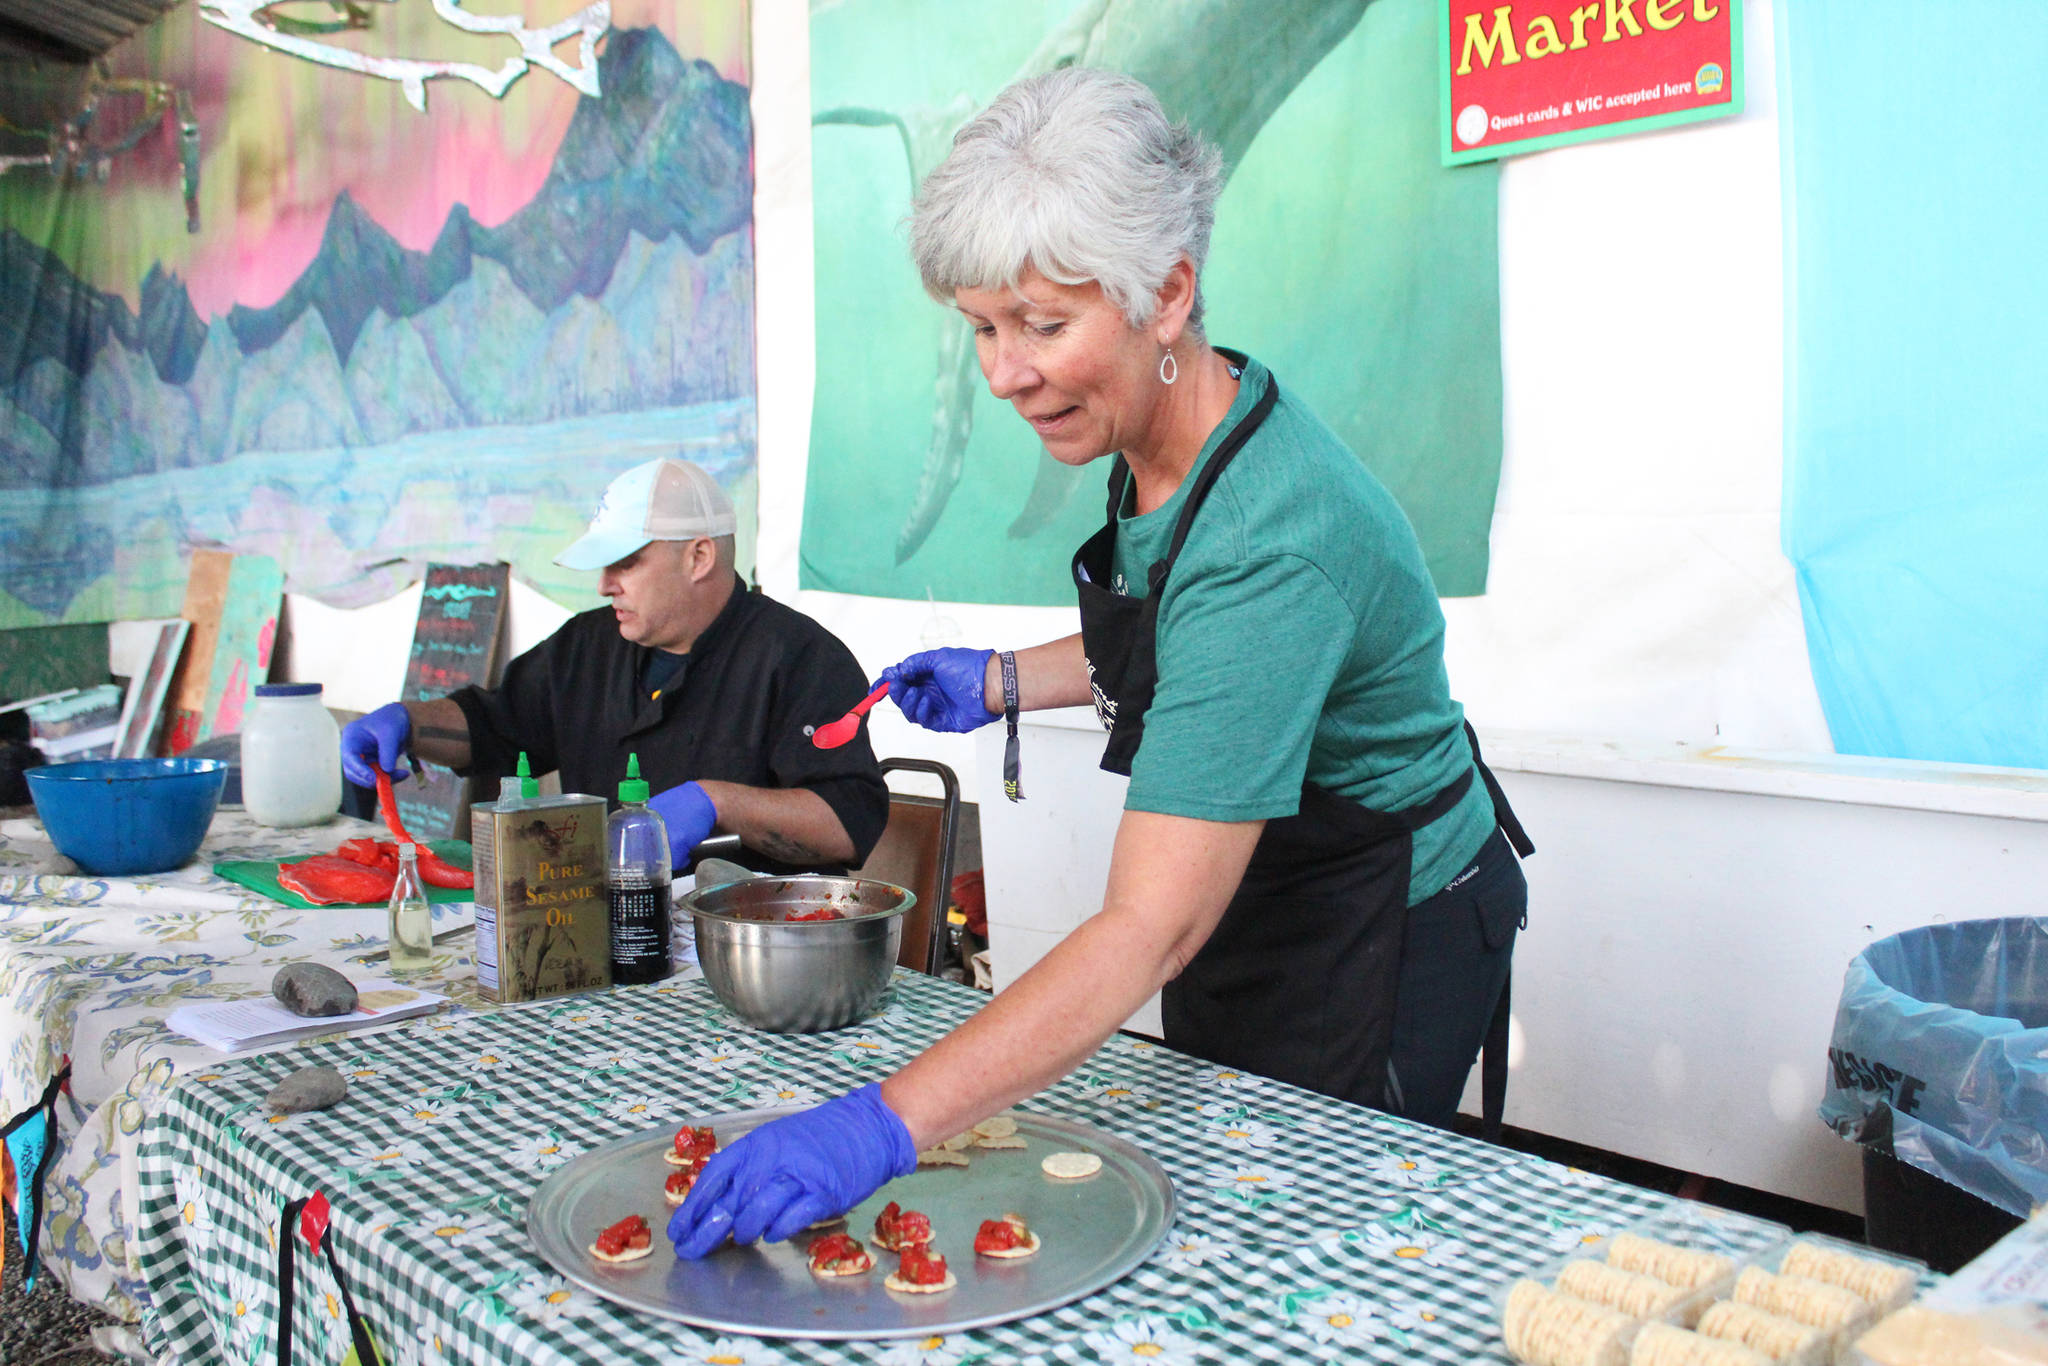 Margarida Kondak lays out salmon poke for festival goers to try during a chef at the festival food demonstration Friday, Aug. 2, 2019 at Salmonfest in Ninilchik, Alaska. (Photo by Megan Pacer/Homer News)